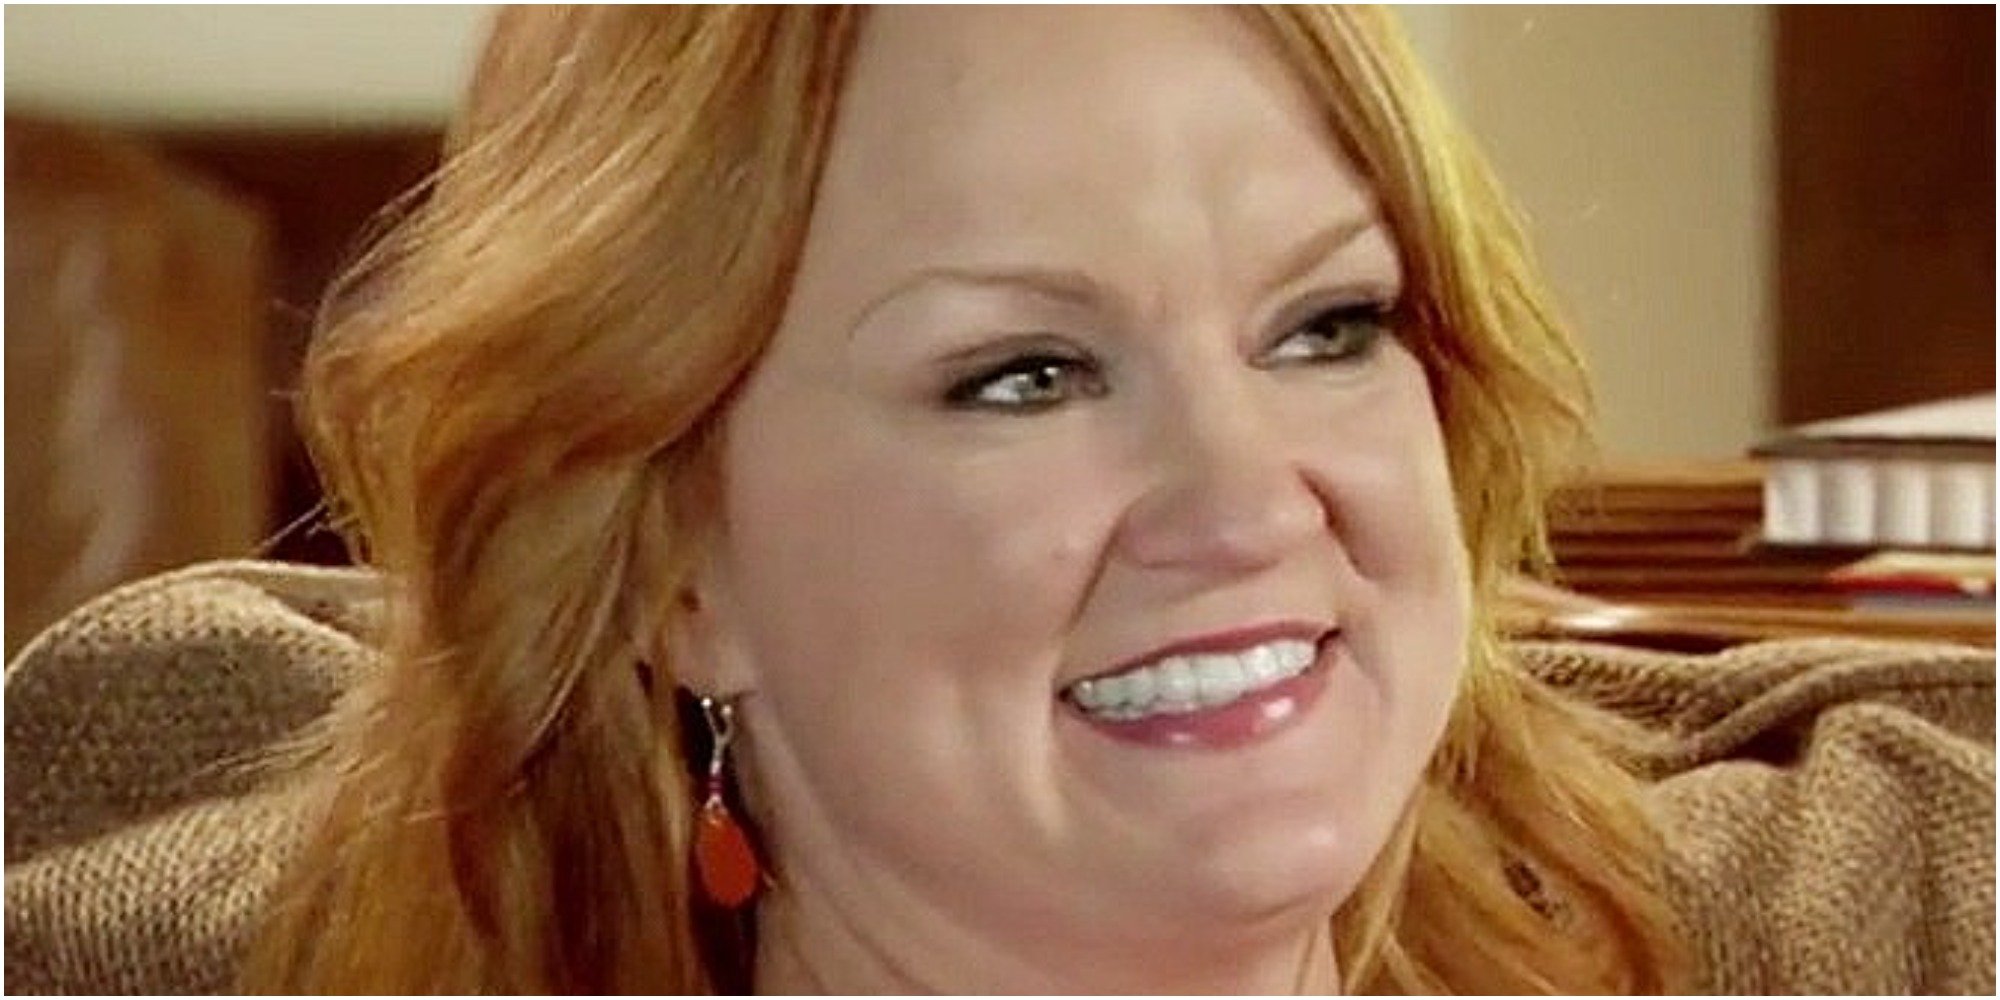 Ree Drummond smiles for the camera on the set of her Food Network series.